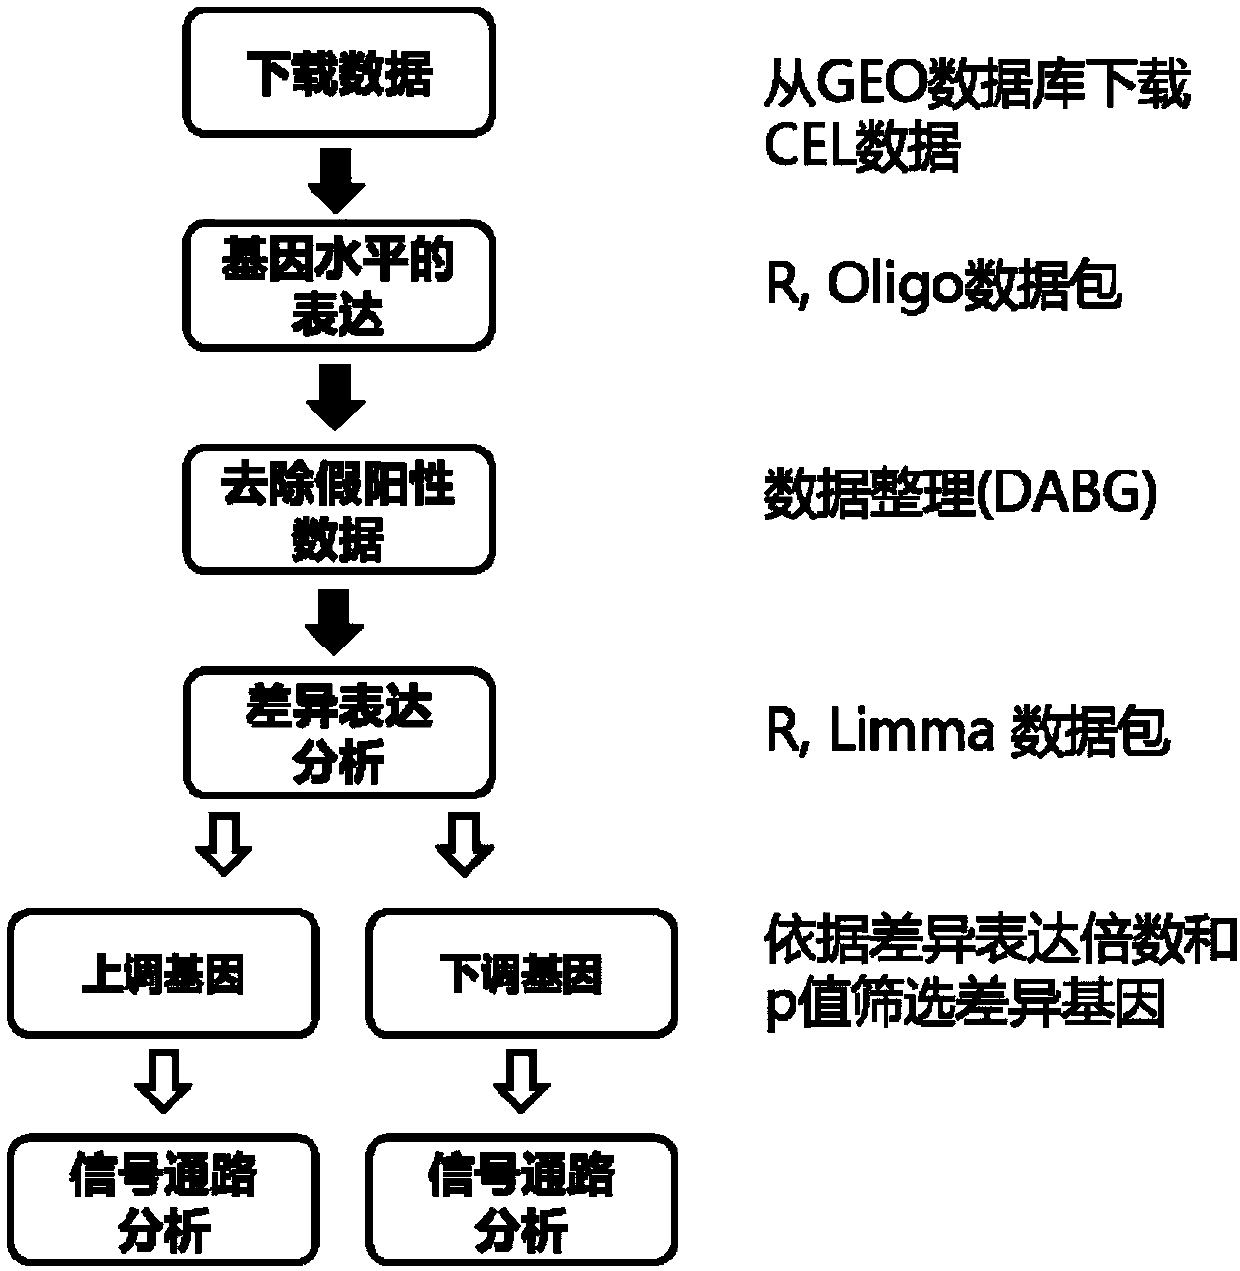 Application of apigenin in preparation of medicine for preventing and treating hemorrhagic cerebrovascular disease and ischemic cerebrovascular disease caused by high blood pressure